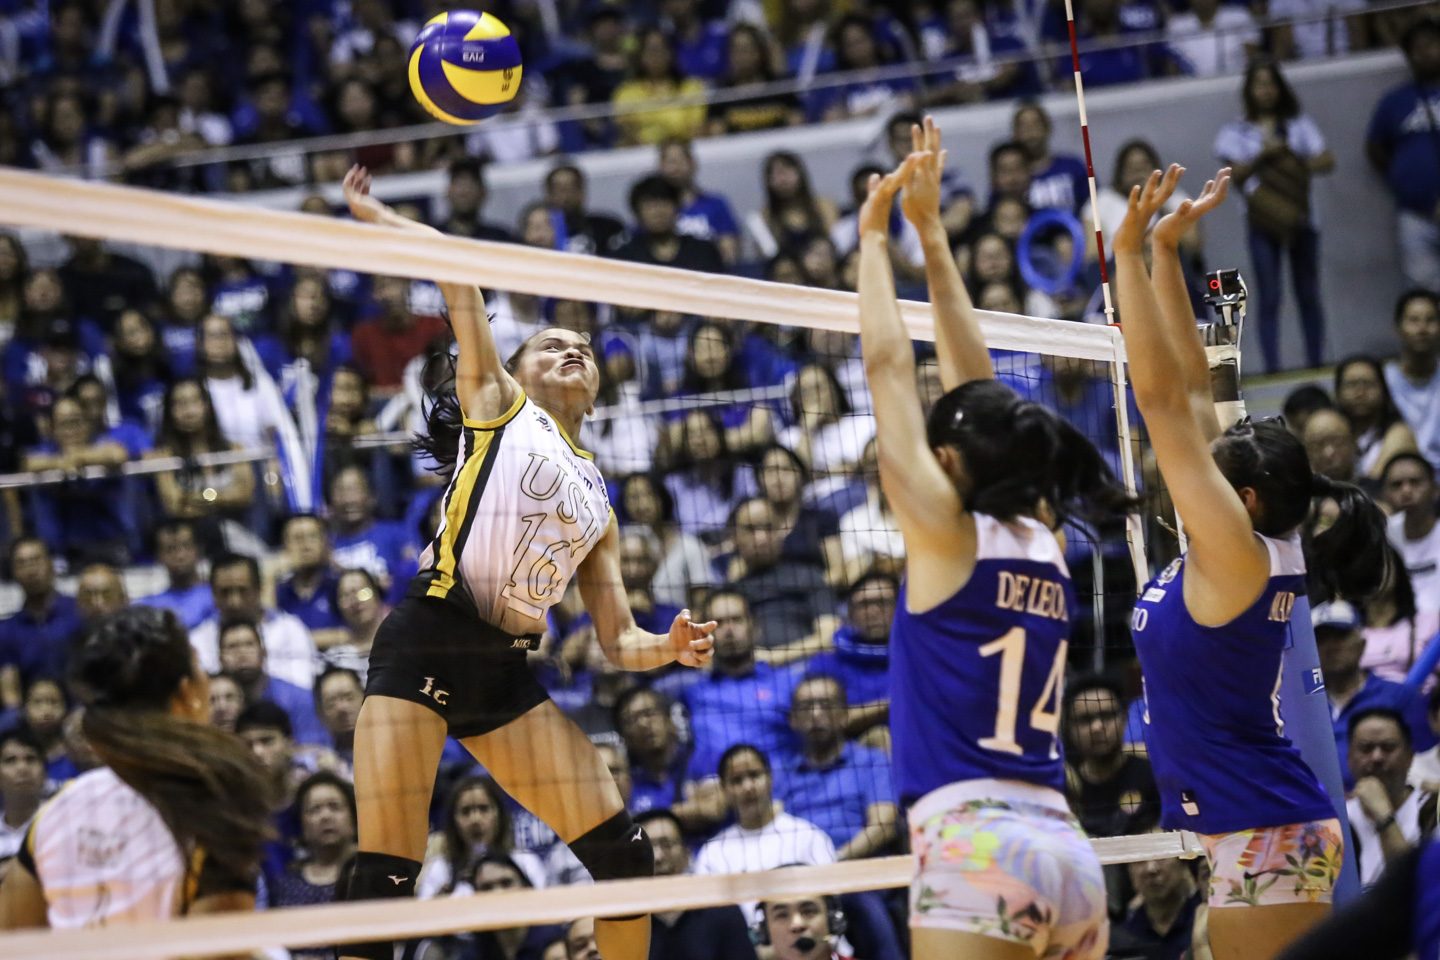 UST stuns Ateneo in straight sets, nears 1st title in a decade